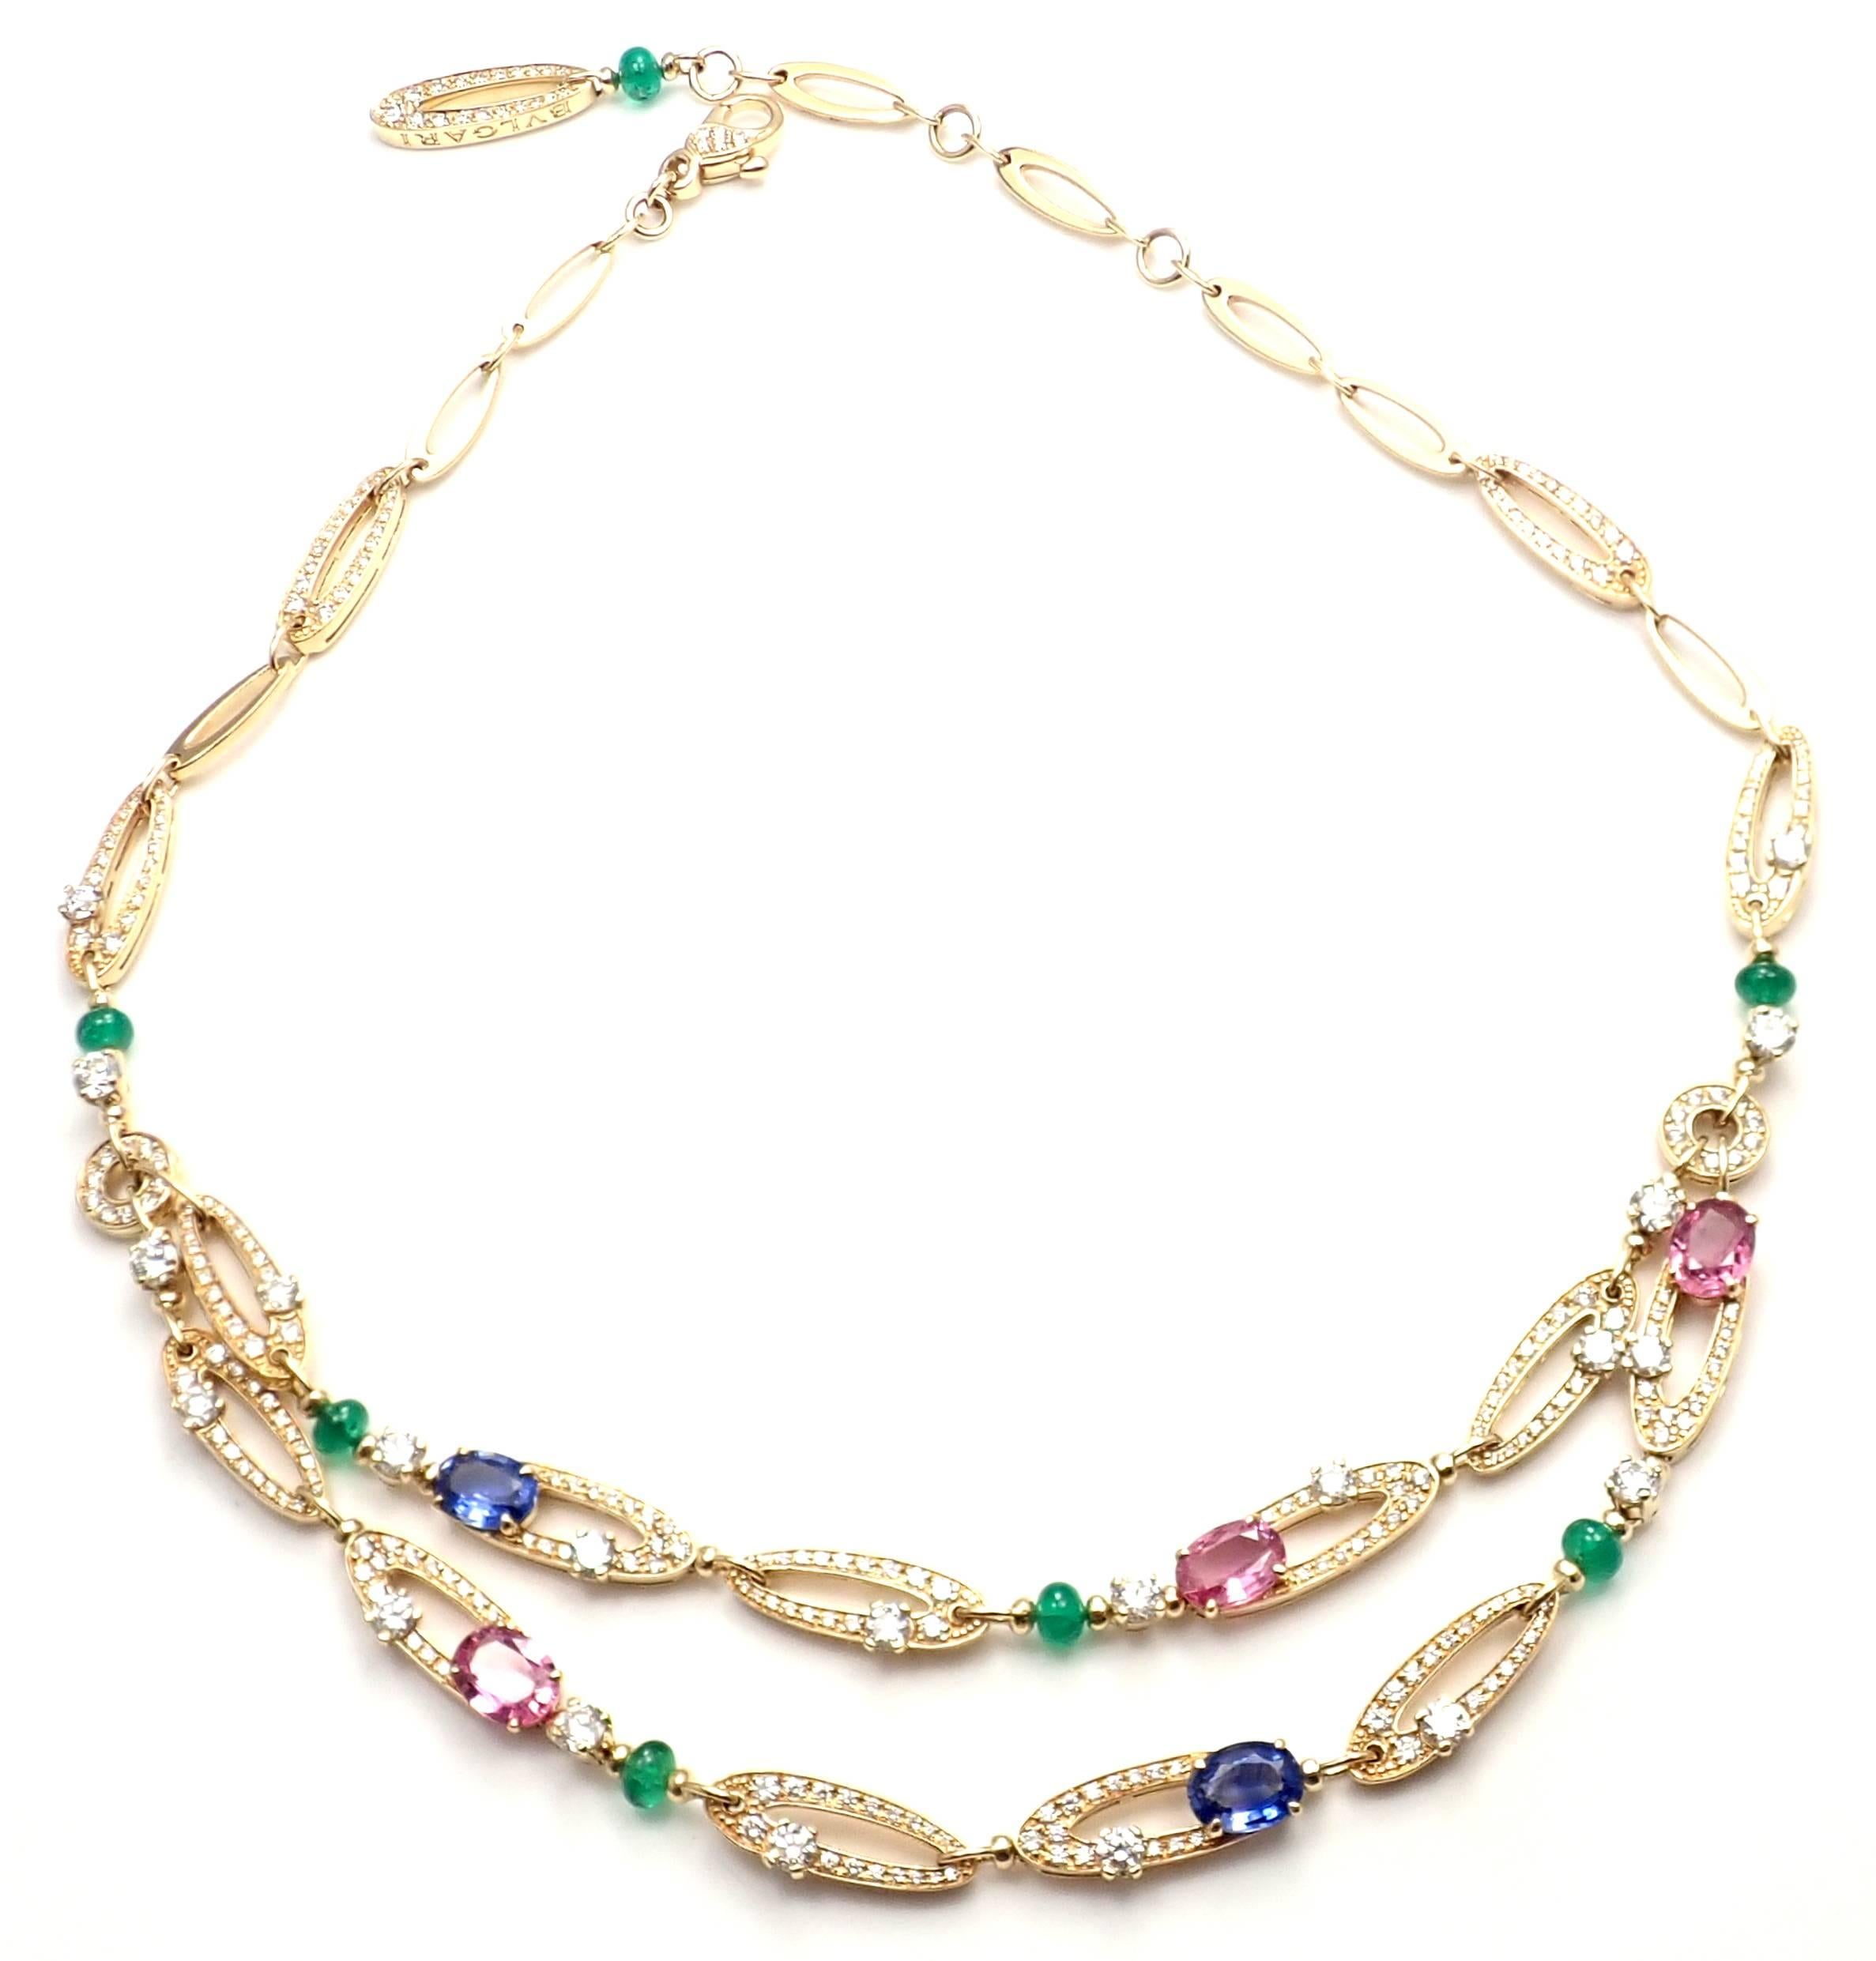 18k Yellow Gold Diamond Multicolor Sapphire Emearld Elysia Necklace by Bulgari. 
With Blue & Purple-Pink sapphires 6.98ct
Emerald beads 3.88ct
Brilliant cut diamonds VVS1 clarity, E color total weight approx. 6.11ct
The Retail Price of this necklace